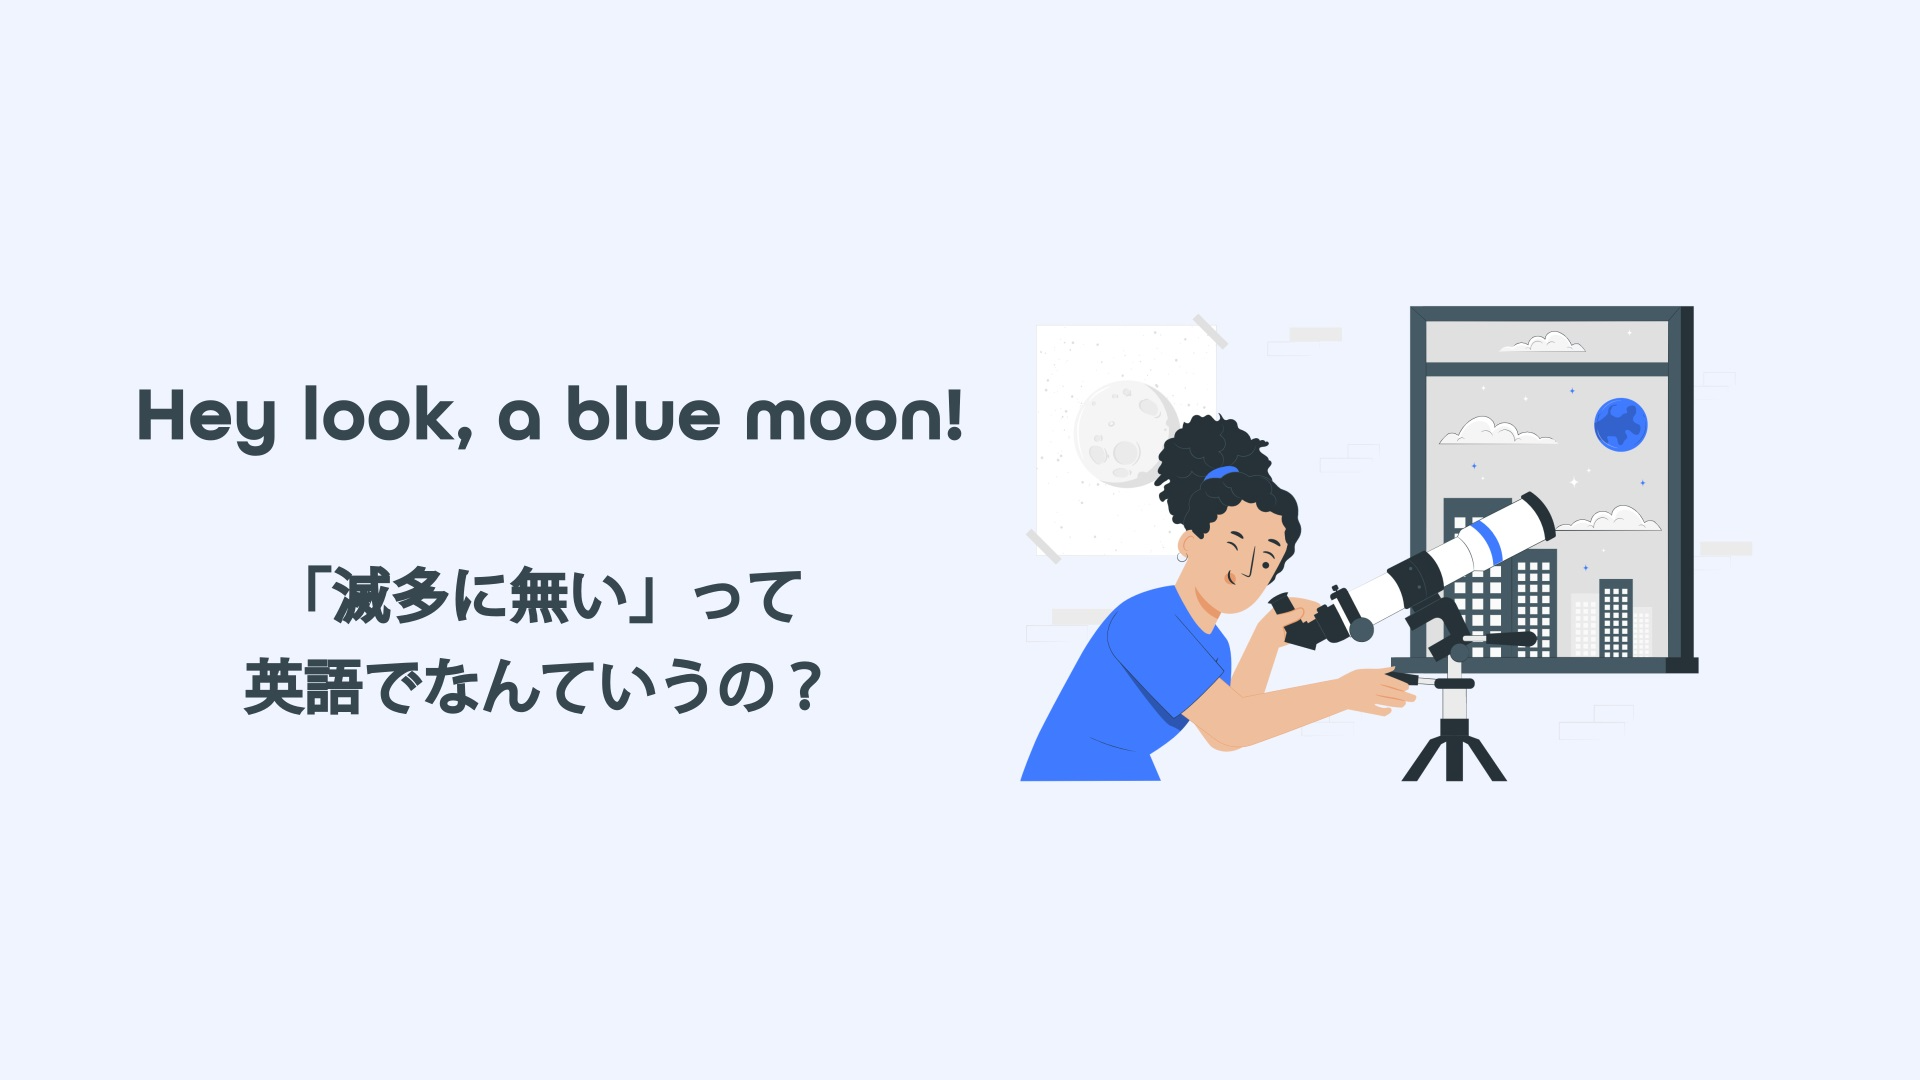 Featured image for “Hey look a blue moon!「滅多に無い」って英語でなんていうの？”